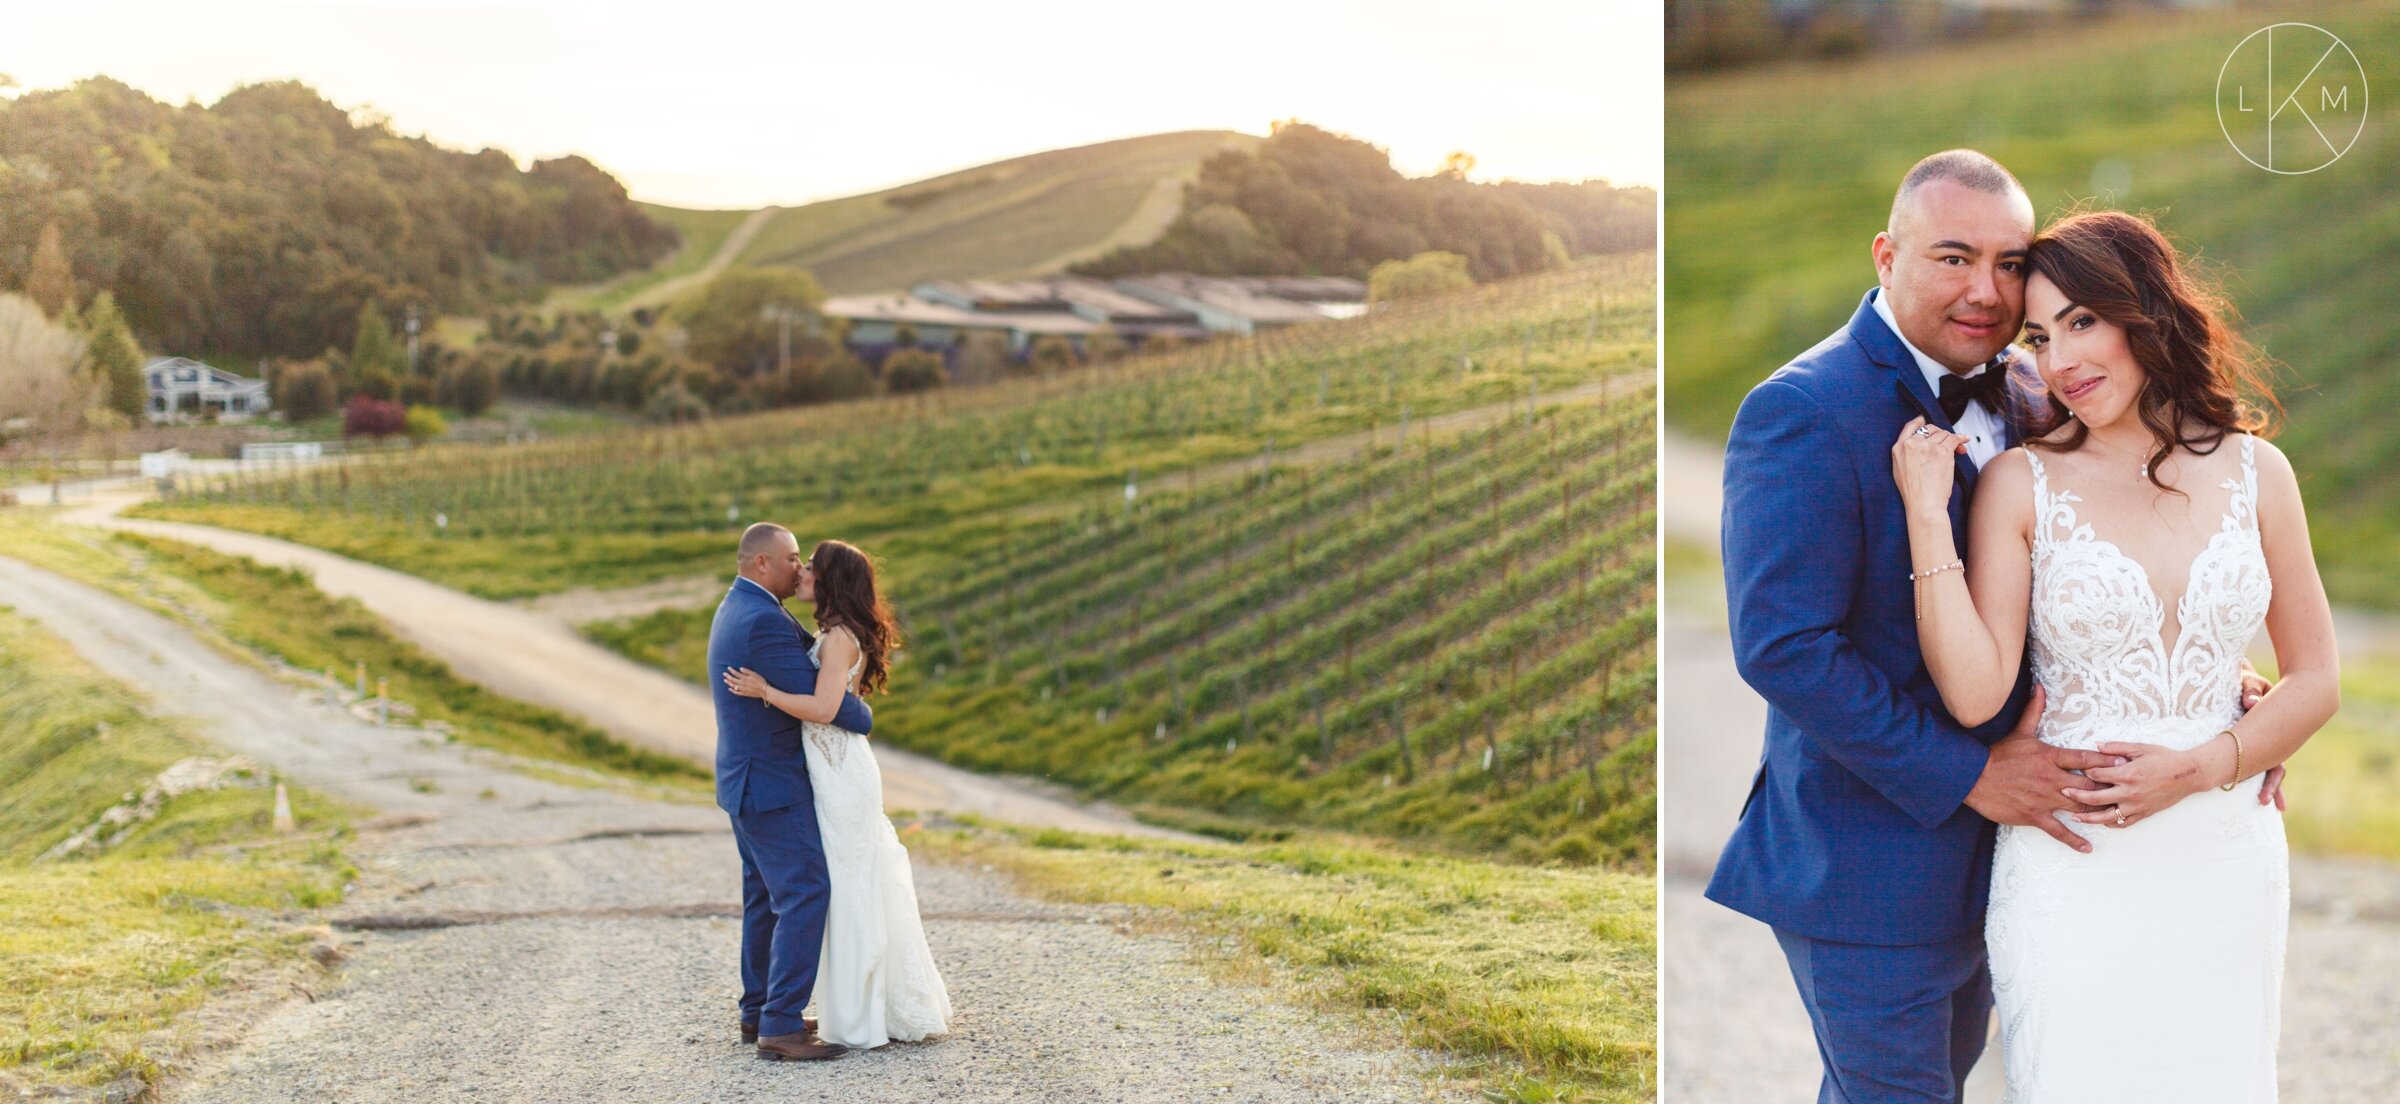 helvin-angela-paso-robles-destination-wedding-tooth-nail-winery 36.jpg